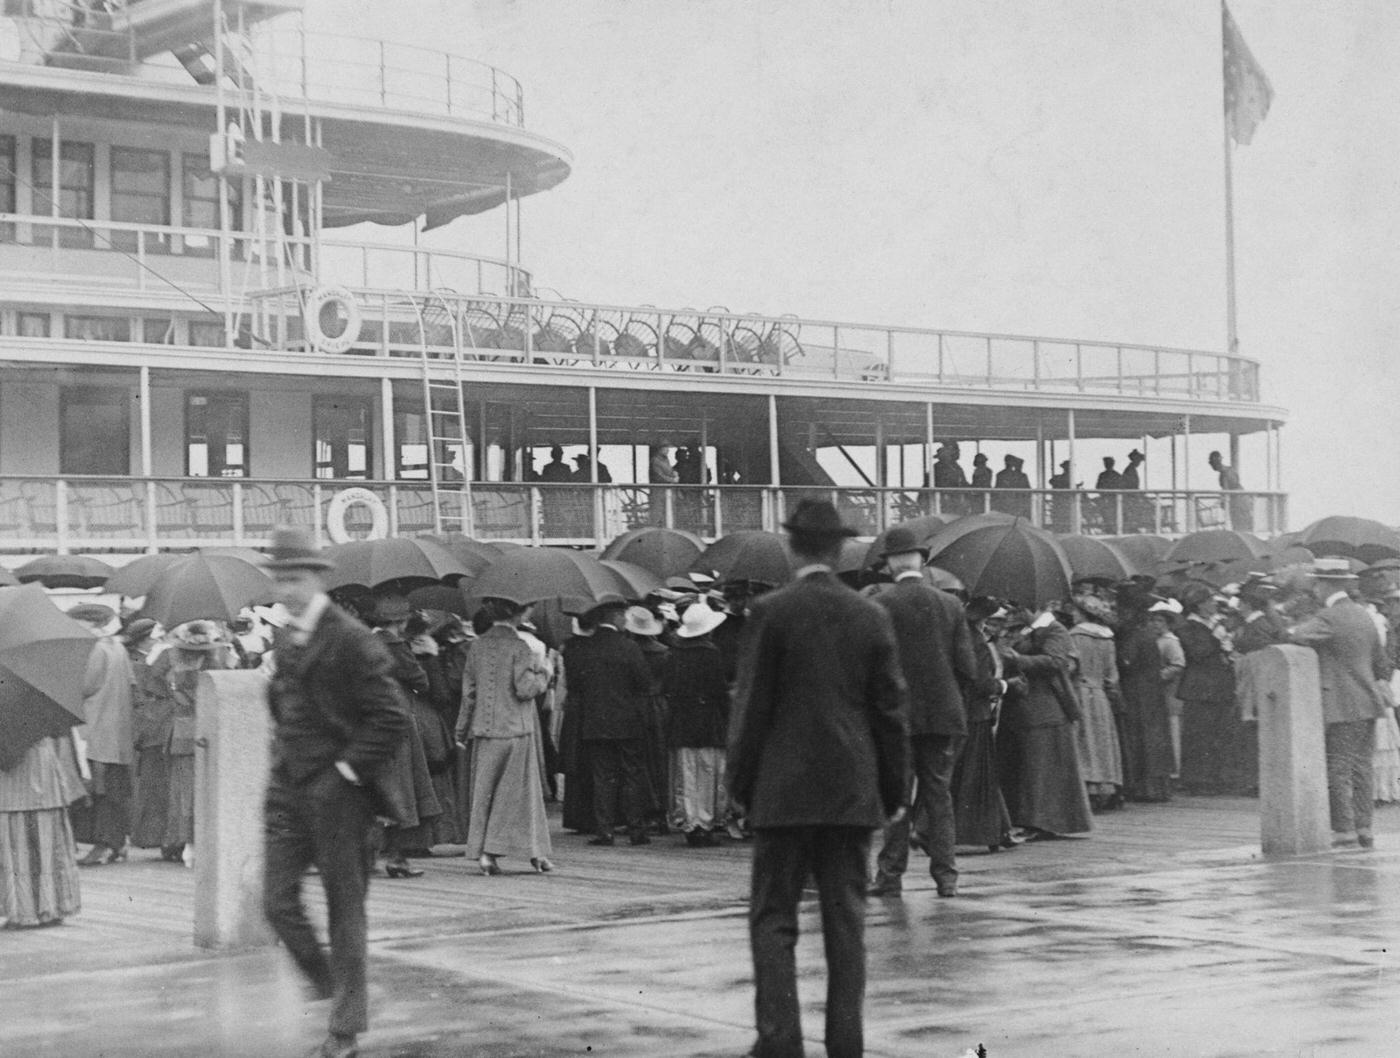 Suffragettes Waiting To Board The Mandalay, Circa 1915